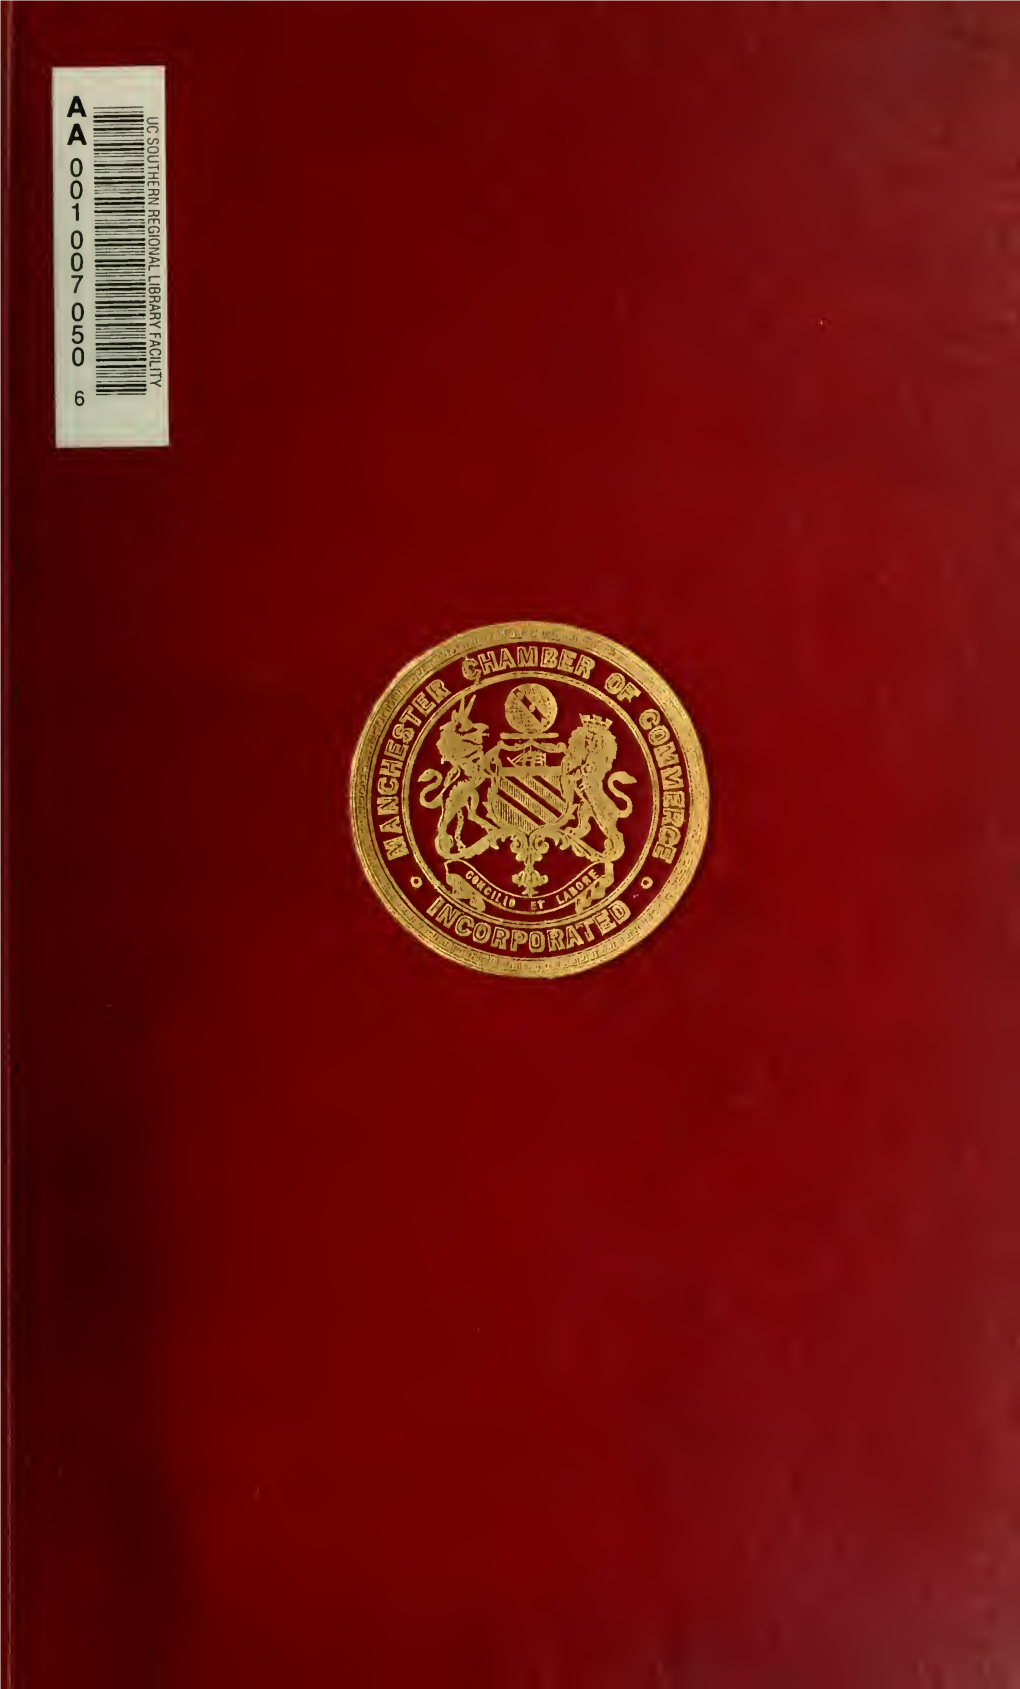 Chapters in the History of the Manchester Chamber of Commerce